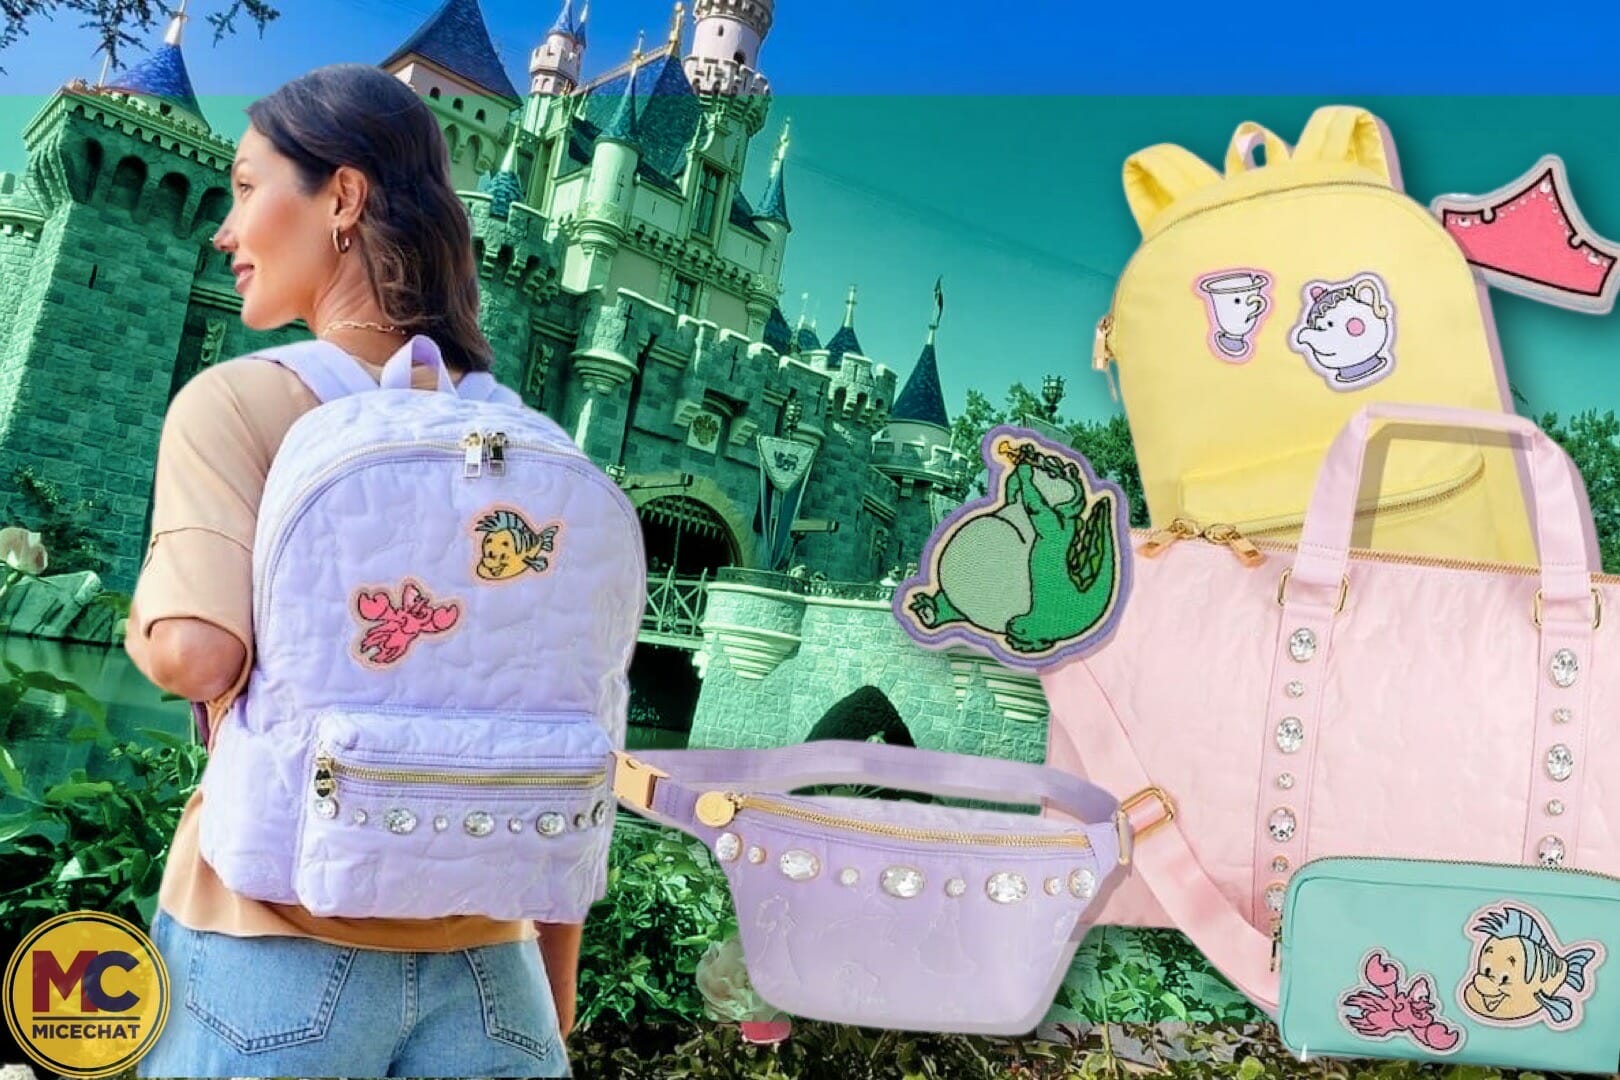 PHOTOS: New Disney Princess Bag Collection by Stoney Clover Lane Available  at Walt Disney World - WDW News Today